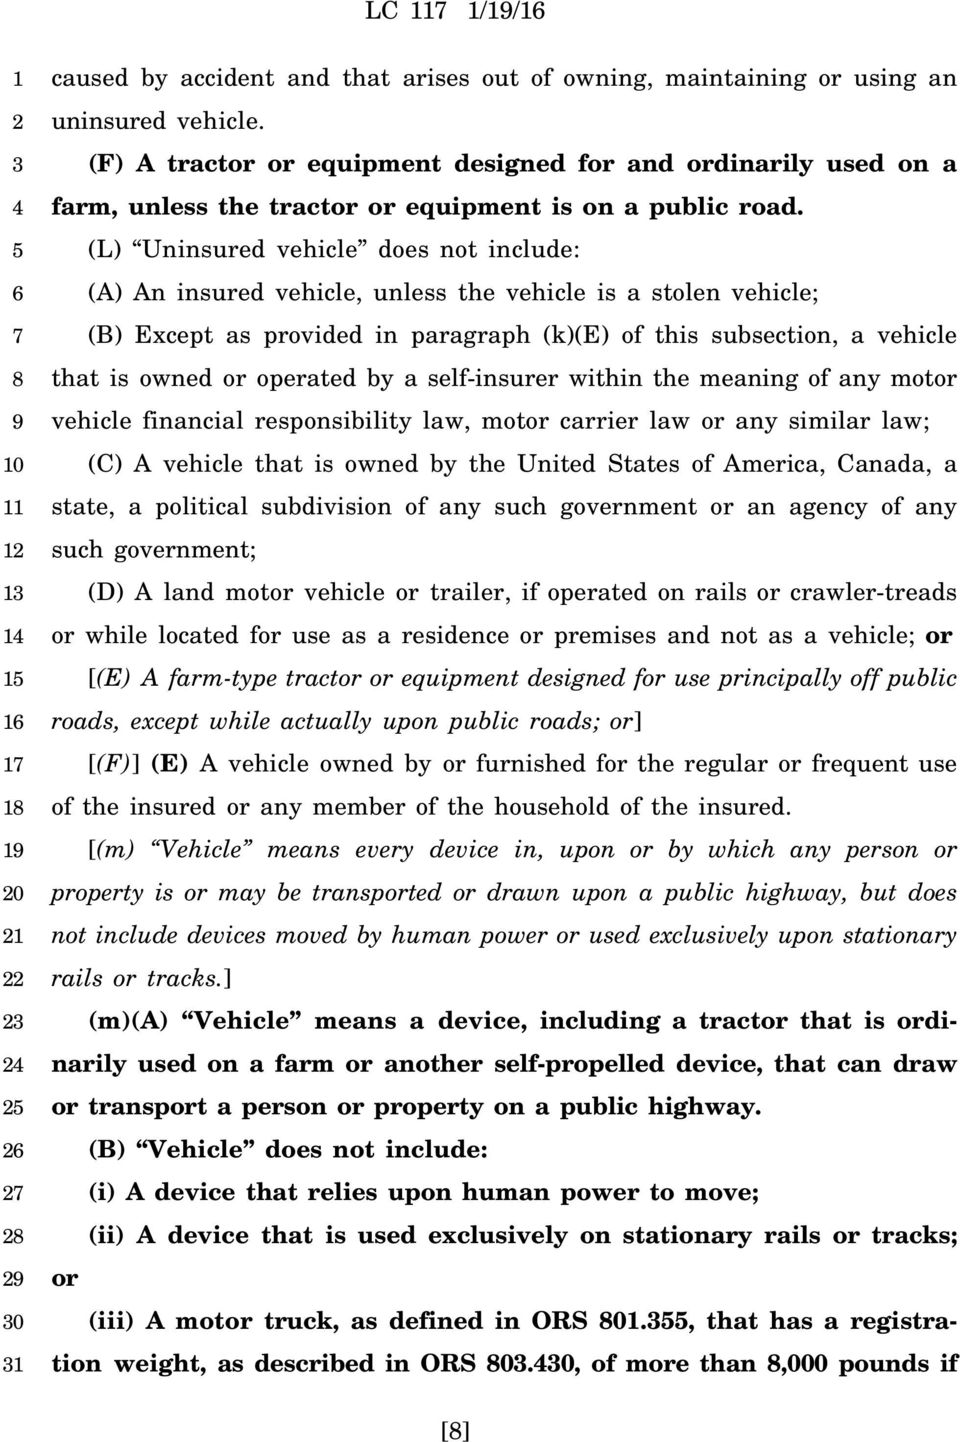 (L) Uninsured vehicle does not include: (A) An insured vehicle, unless the vehicle is a stolen vehicle; (B) Except as provided in paragraph (k)(e) of this subsection, a vehicle that is owned or